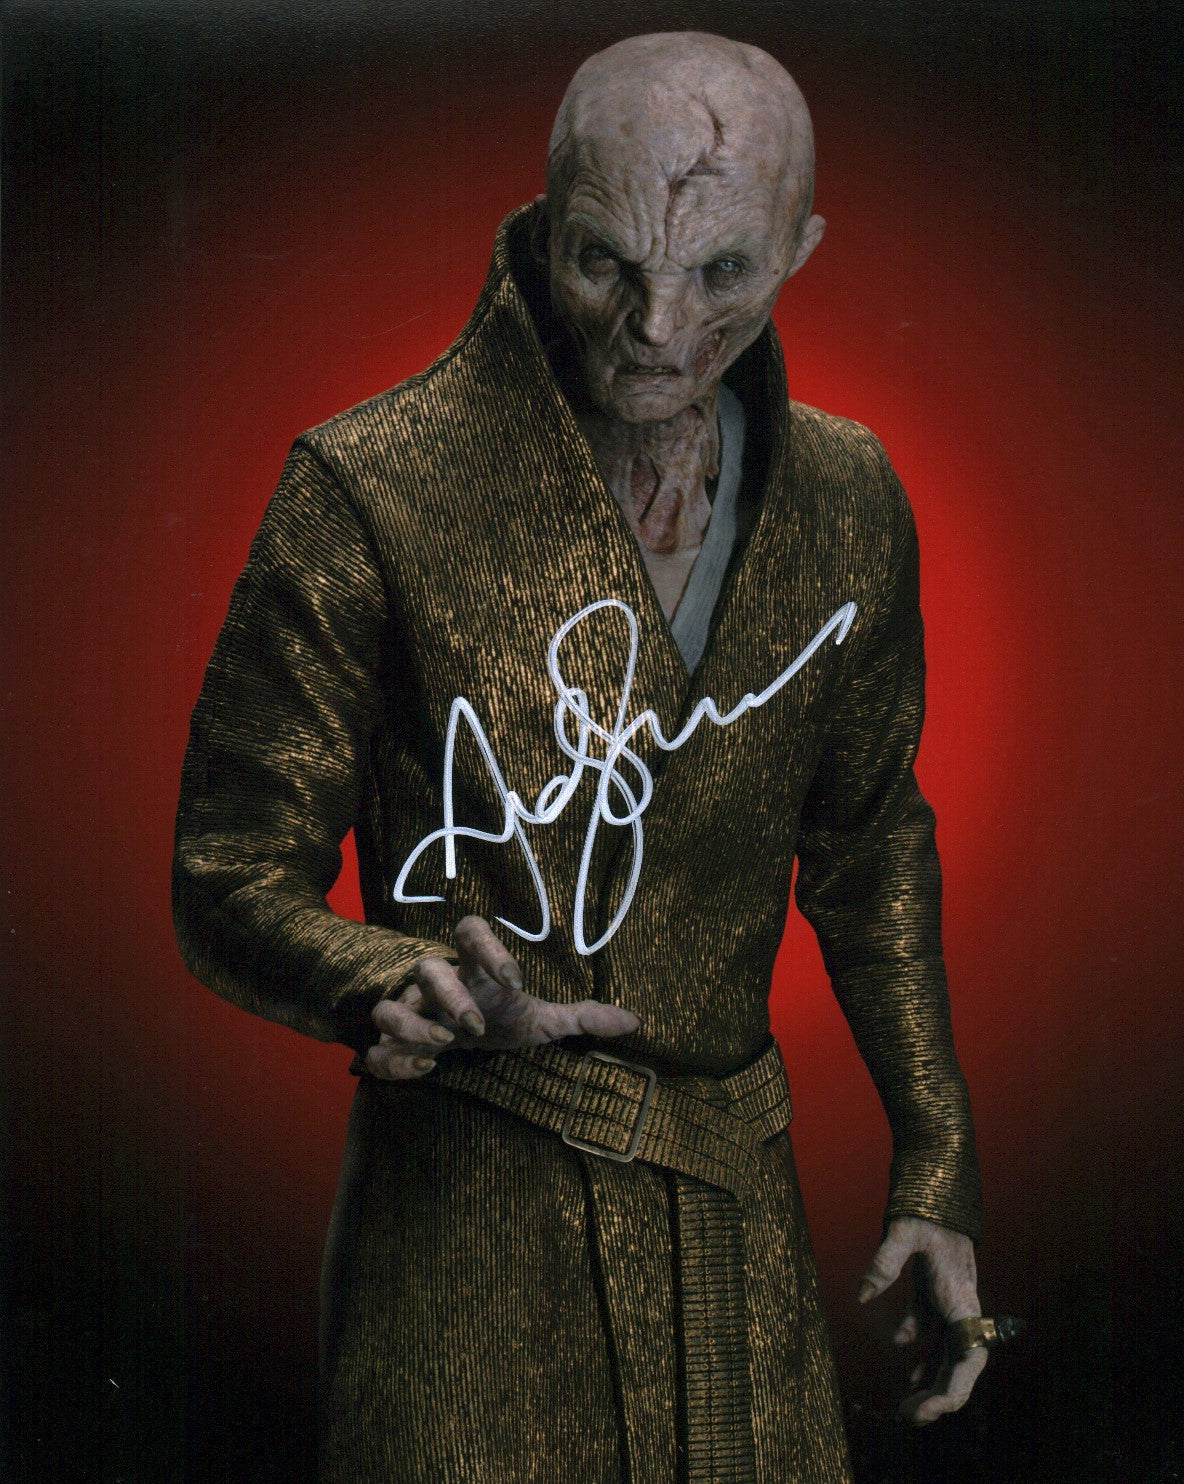 Andy Serkis Star Wars Trilogy 8x10 Signed Photo JSA COA Certified Autograph GalaxyCon